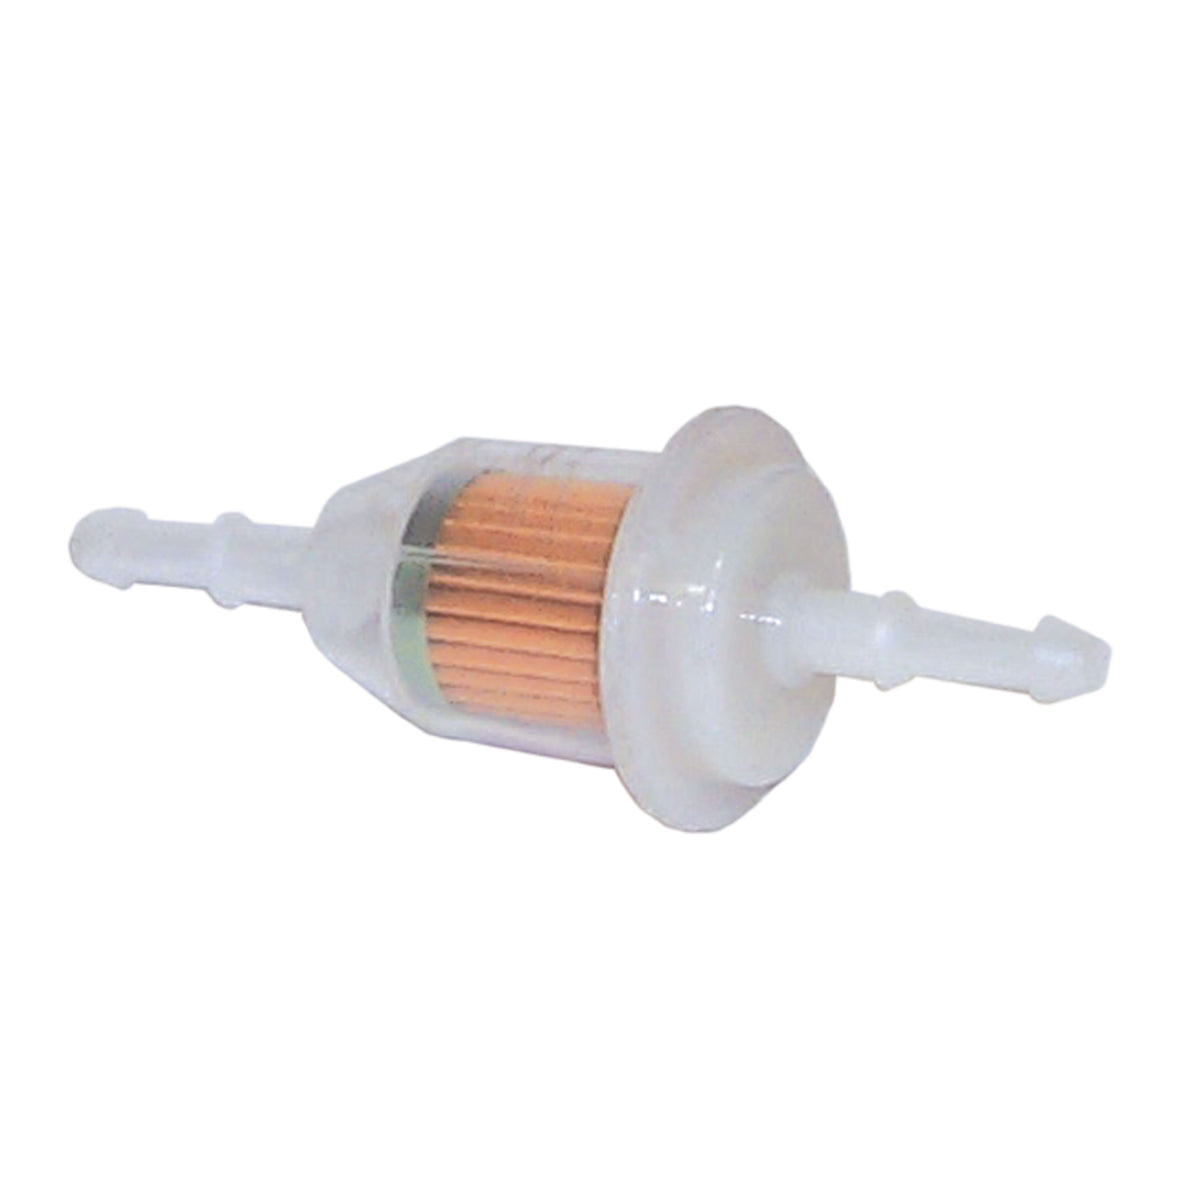 Sierra 18-7723 Fuel Filter for 1/4" and 5/16" Hose